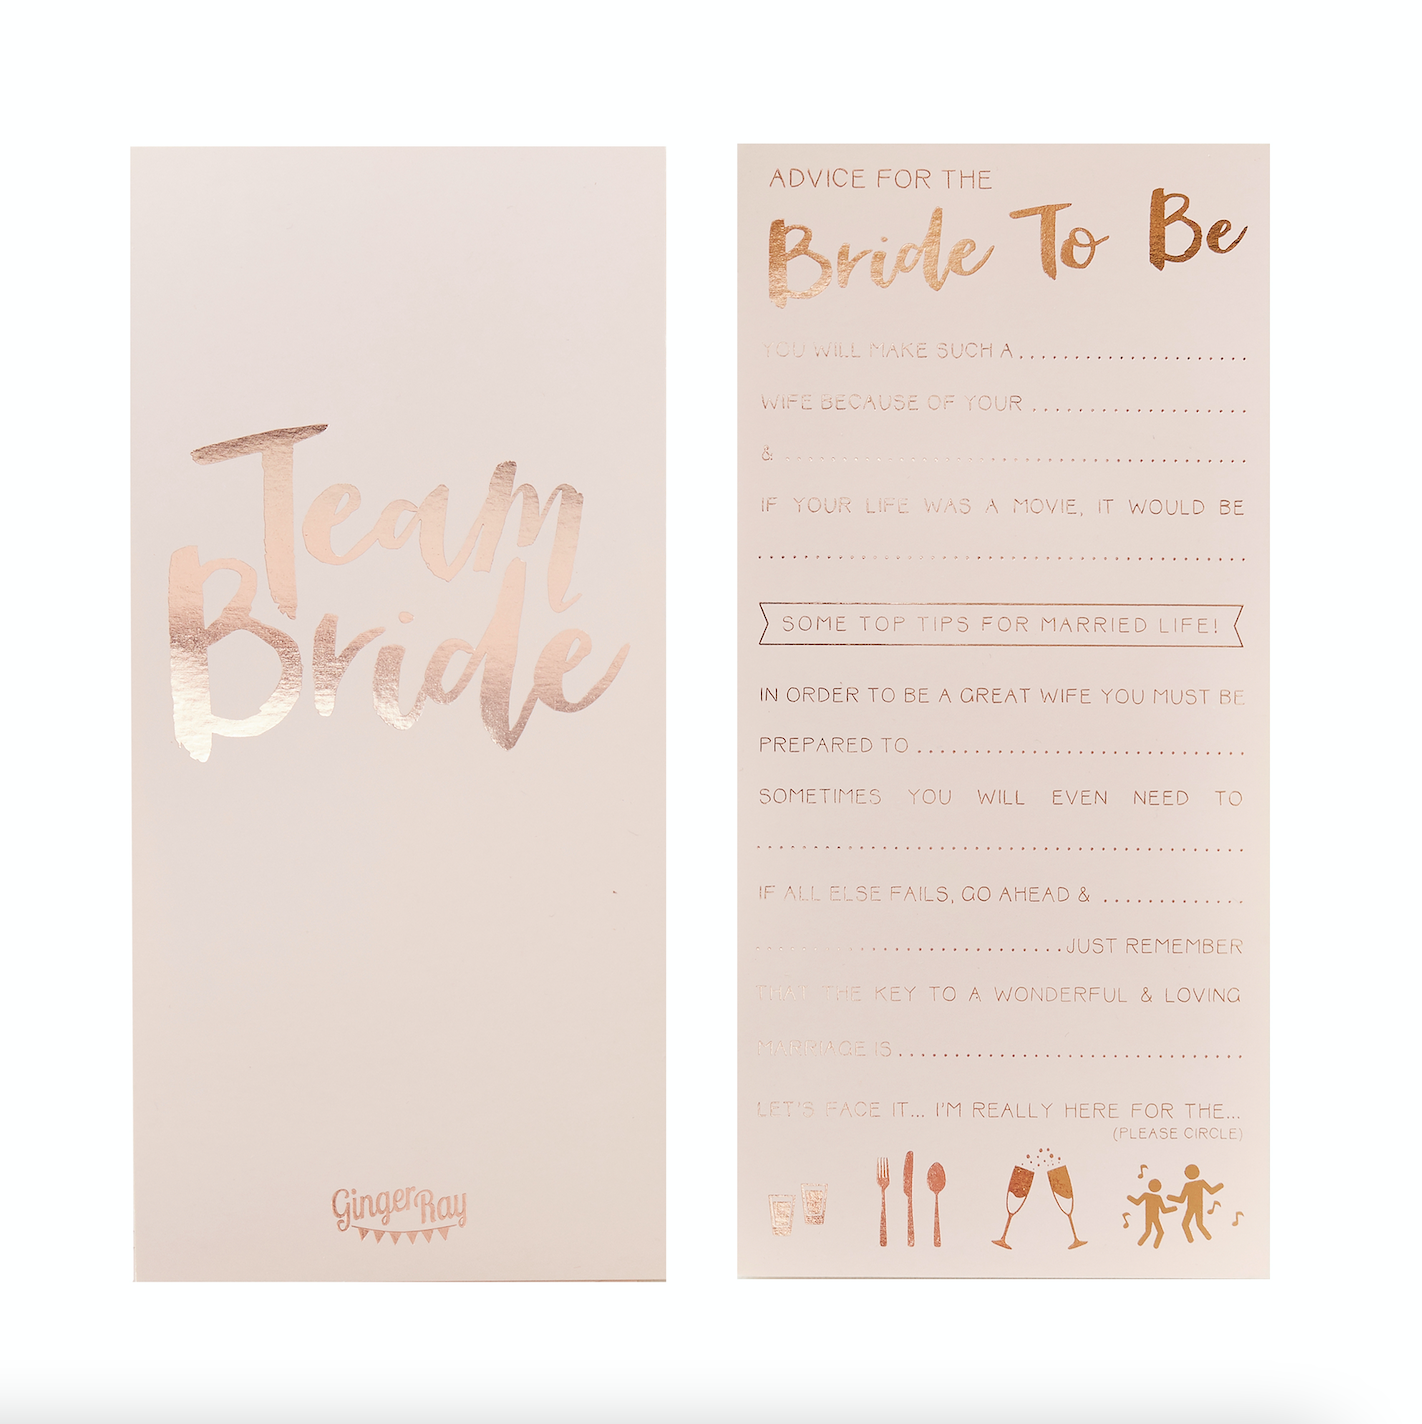 Pink and Rose Gold Advice for the Bride to Be Cards - Team Bride